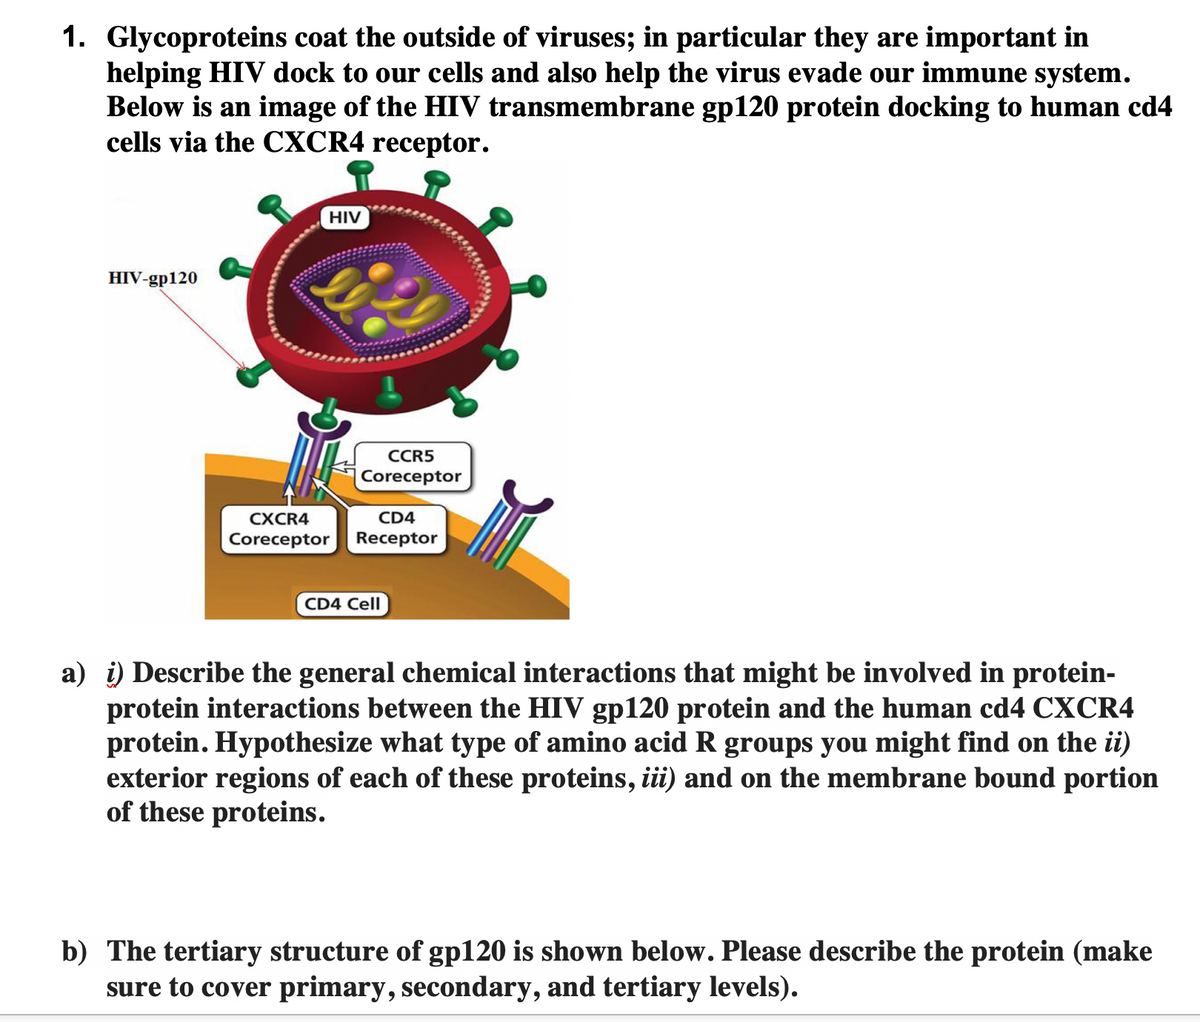 1. Glycoproteins coat the outside of viruses; in particular they are important in
helping HIV dock to our cells and also help the virus evade our immune system.
Below is an image of the HIV transmembrane gp120 protein docking to human cd4
cells via the CXCR4 receptor.
HIV-gp120
HIV
CXCR4
Coreceptor
CCR5
Coreceptor
CD4
Receptor
CD4 Cell
a) i) Describe the general chemical interactions that might be involved in protein-
protein interactions between the HIV gp120 protein and the human cd4 CXCR4
protein. Hypothesize what type of amino acid R groups you might find on the ii)
exterior regions of each of these proteins, iii) and on the membrane bound portion
of these proteins.
b) The tertiary structure of gp120 is shown below. Please describe the protein (make
sure to cover primary, secondary, and tertiary levels).